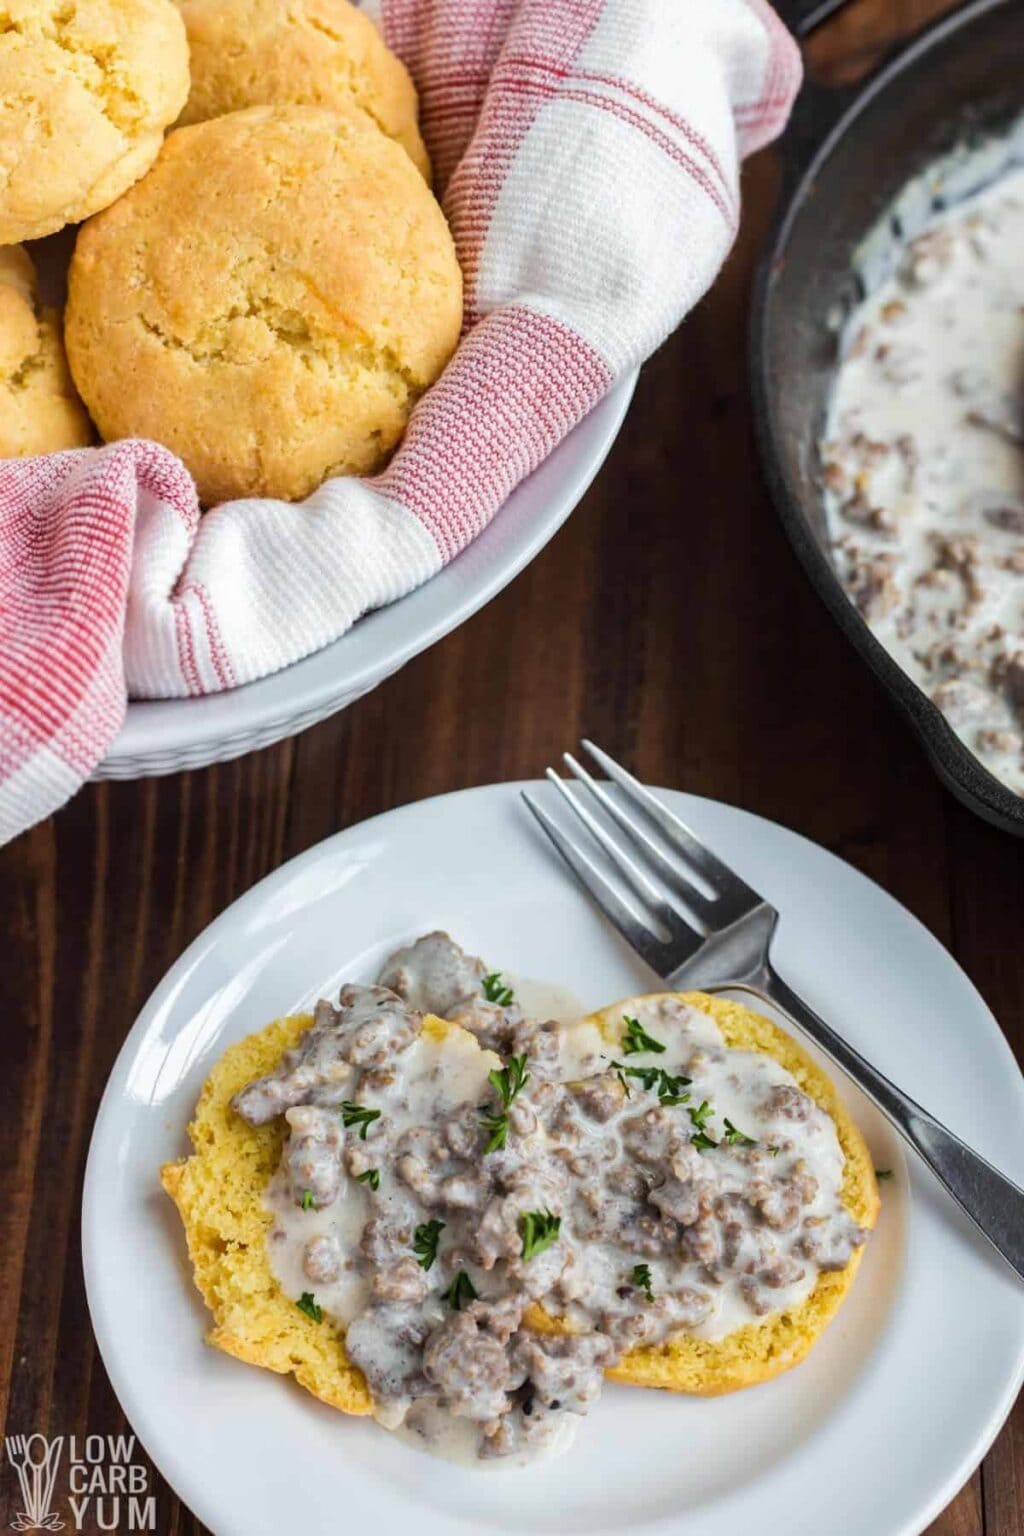 Biscuits and Gravy from Low Carb Yum